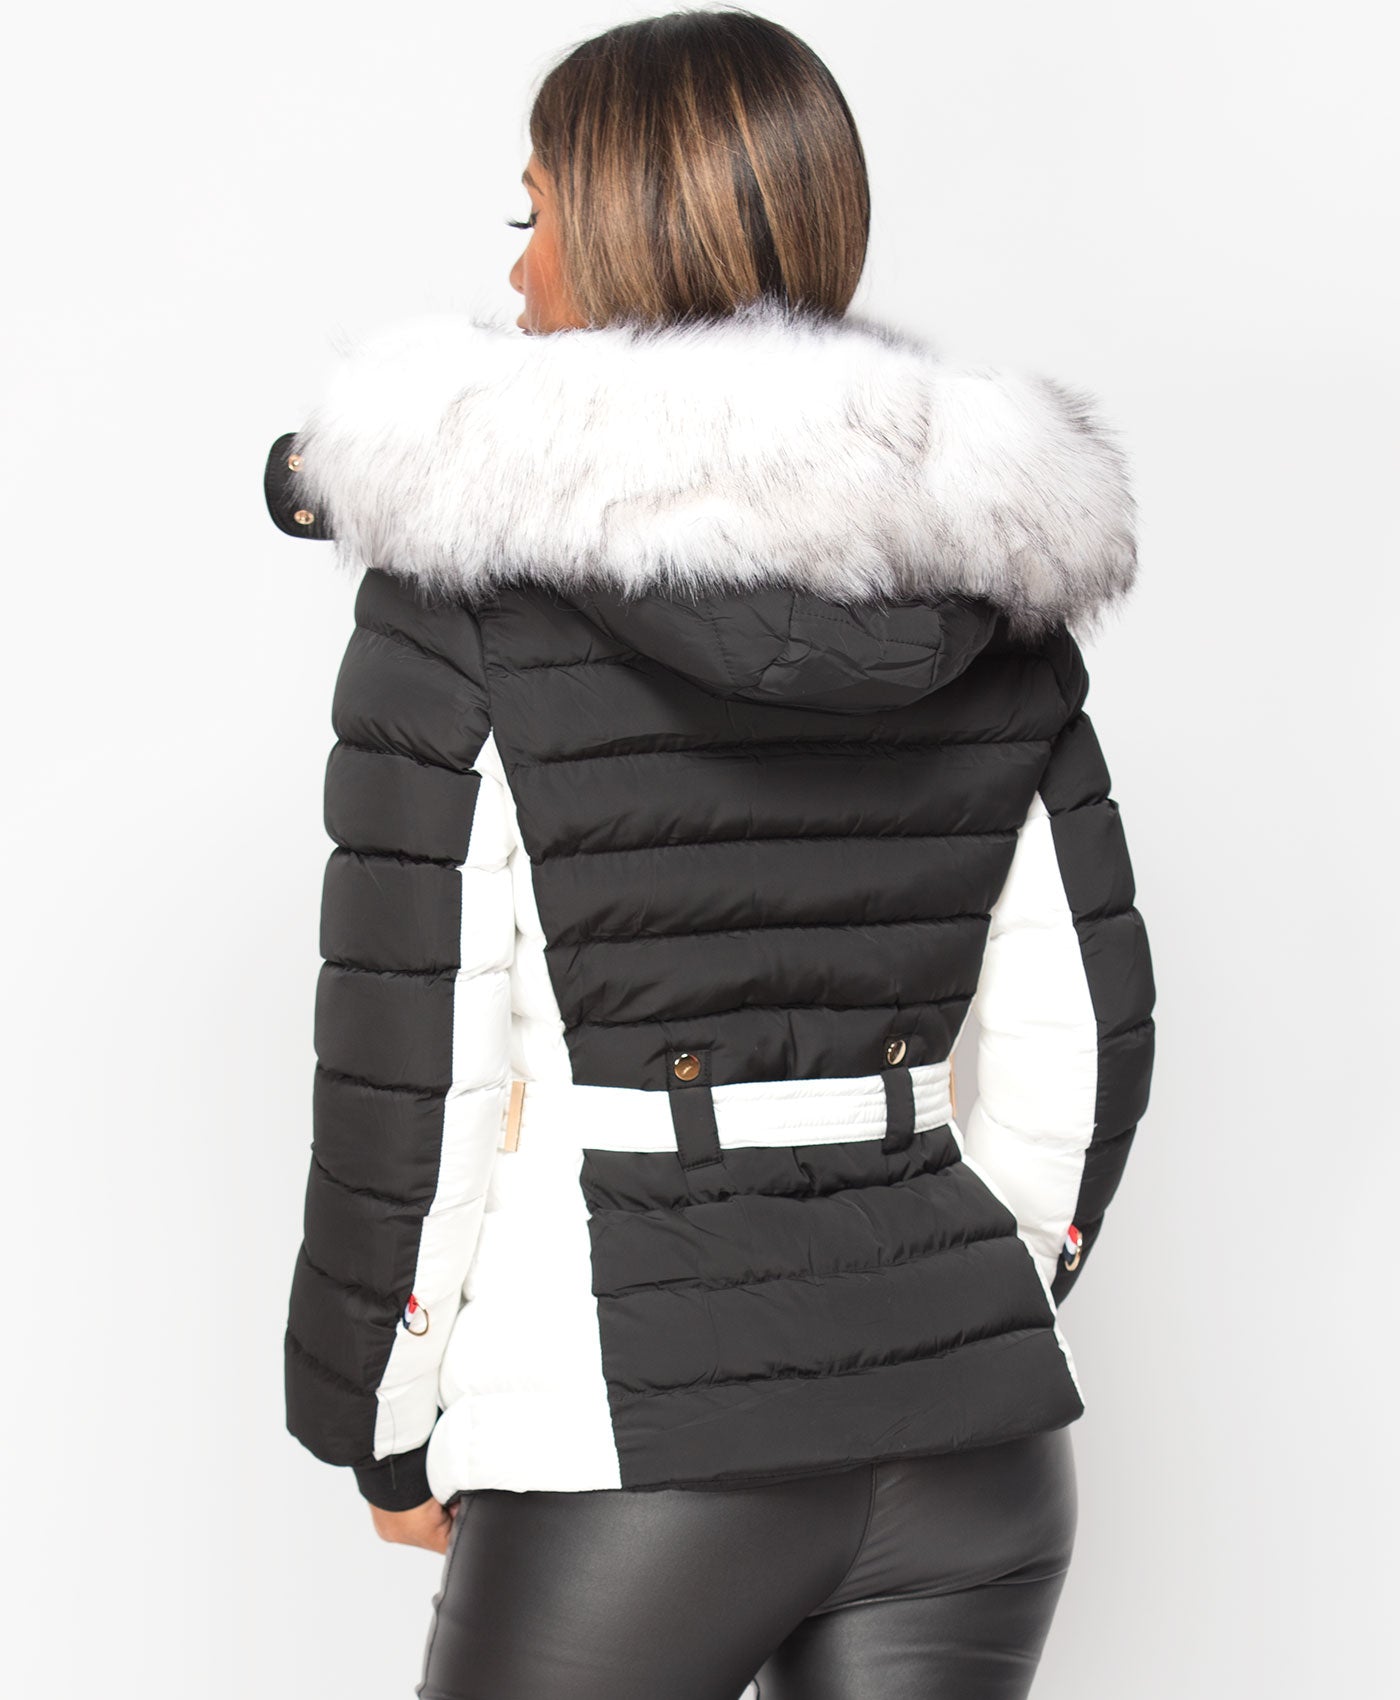 Black-White-Y-912-Quilted-Padded-Contrast-Fur-Hooded-Puffer-Jacket-5